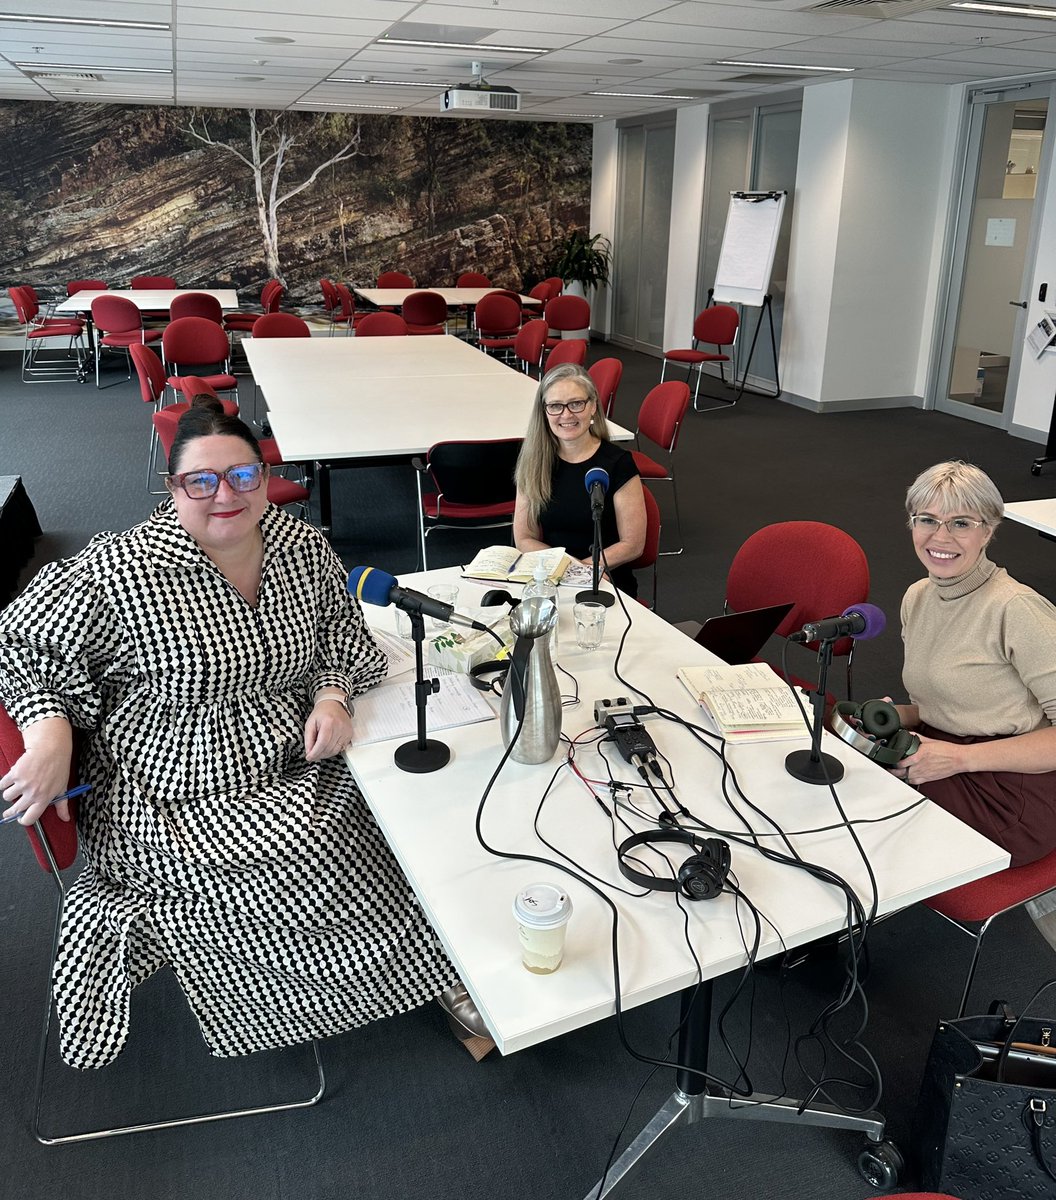 @SophieSpecjal thank you for inviting me to your podcast Talking Teaching @EduMelb inspired after discussing research, AI and teaching with @Lilylauren and you @AERC_UniMelb #TeachingMatters #AI using Norwegian examples too @SlateResearch @SivGamlem @blikstad_balas